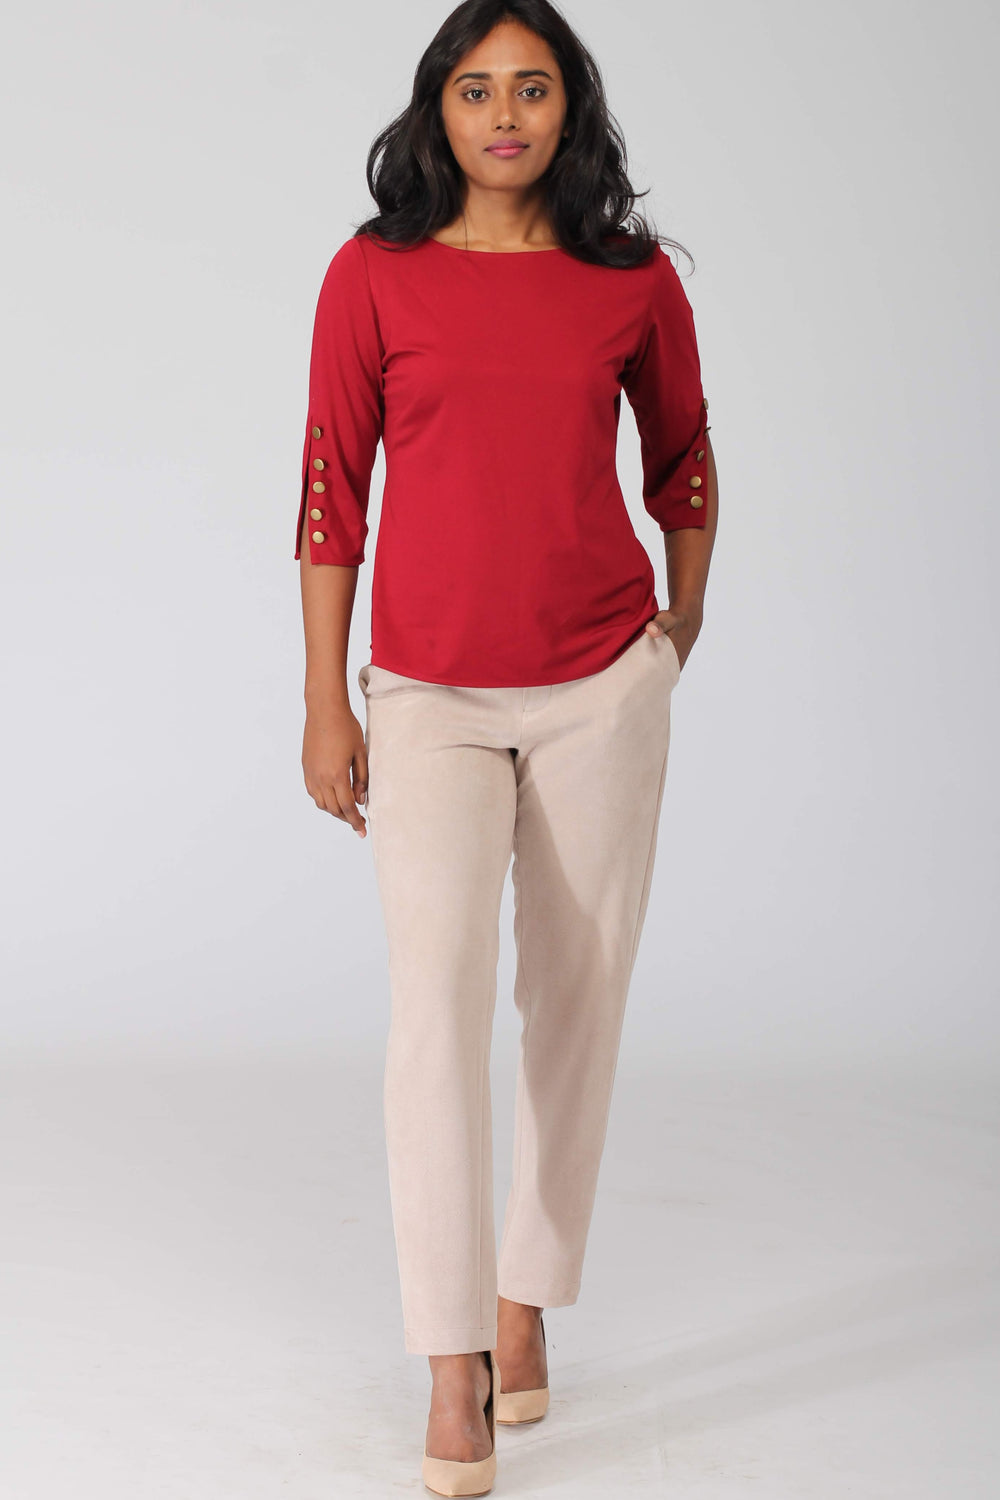 Rosewood Viscose Knit Top with slit sleeve